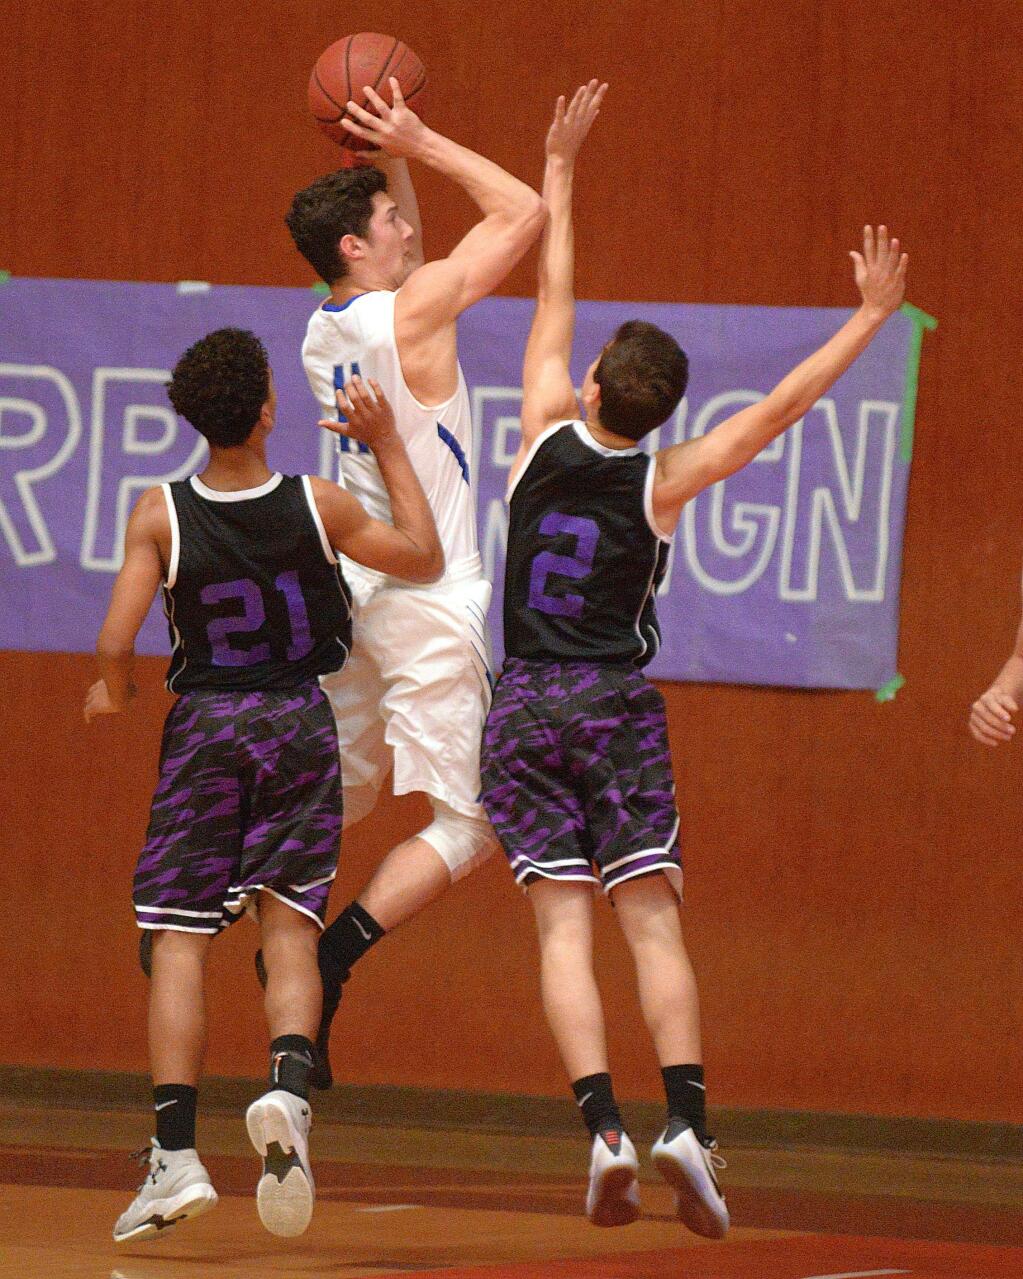 SUMNER FOWLER/FOR THE ARGUS-COURIERAnaly's Dom Tripodi fires over Petaluma defenders Trey Davis (21) and Austin Paretti (2) for two of the 16 points he scored in Analy's win in the SCL Tournament championship game.